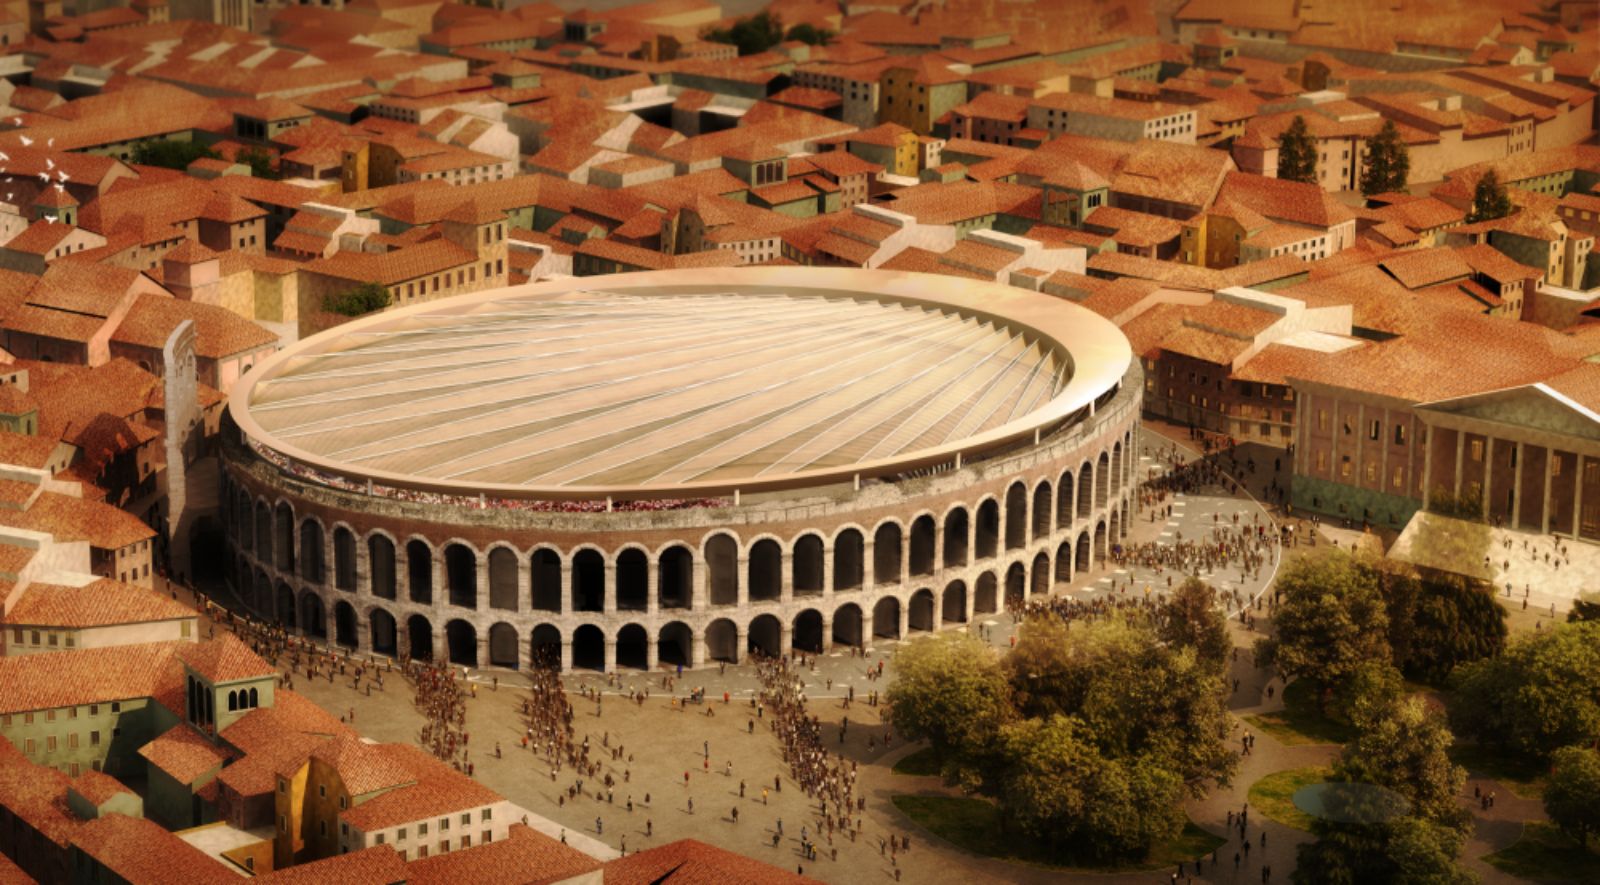 a new roof for Verona’s historic arena